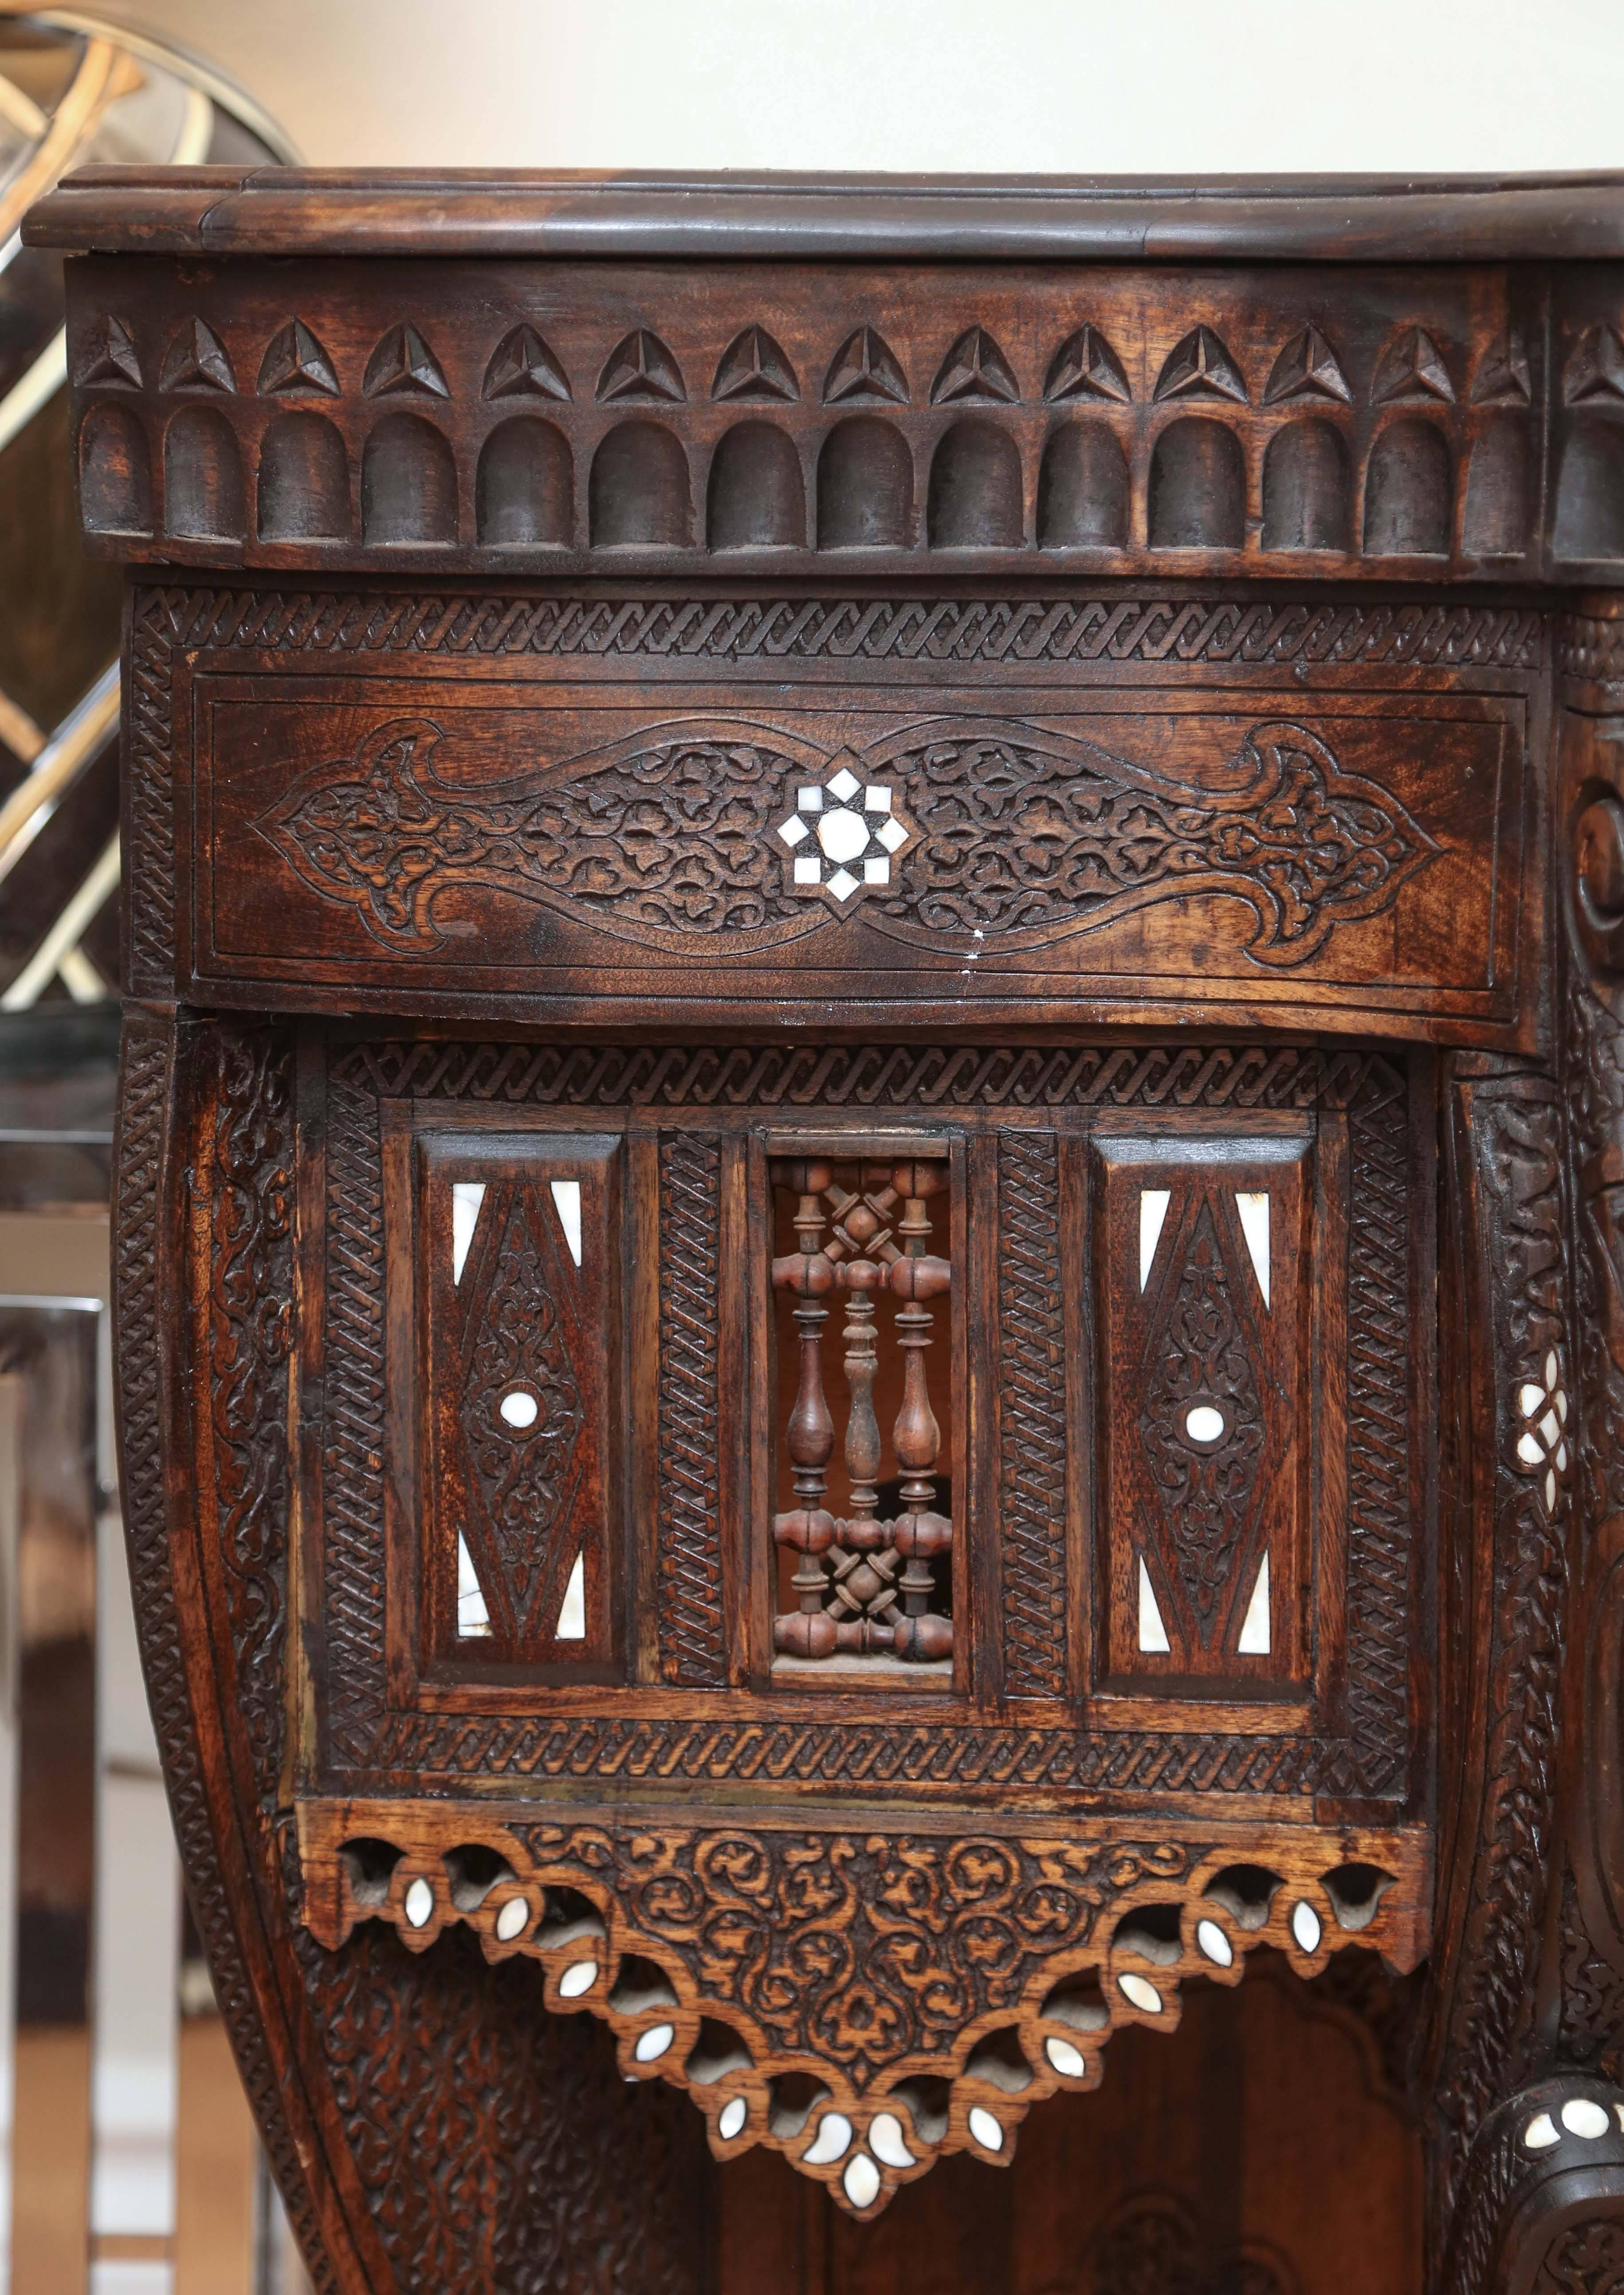 Syrian carved wood console with delicate mother-of-pearl inlays. The top is hinged to open and reveals a storage compartment.